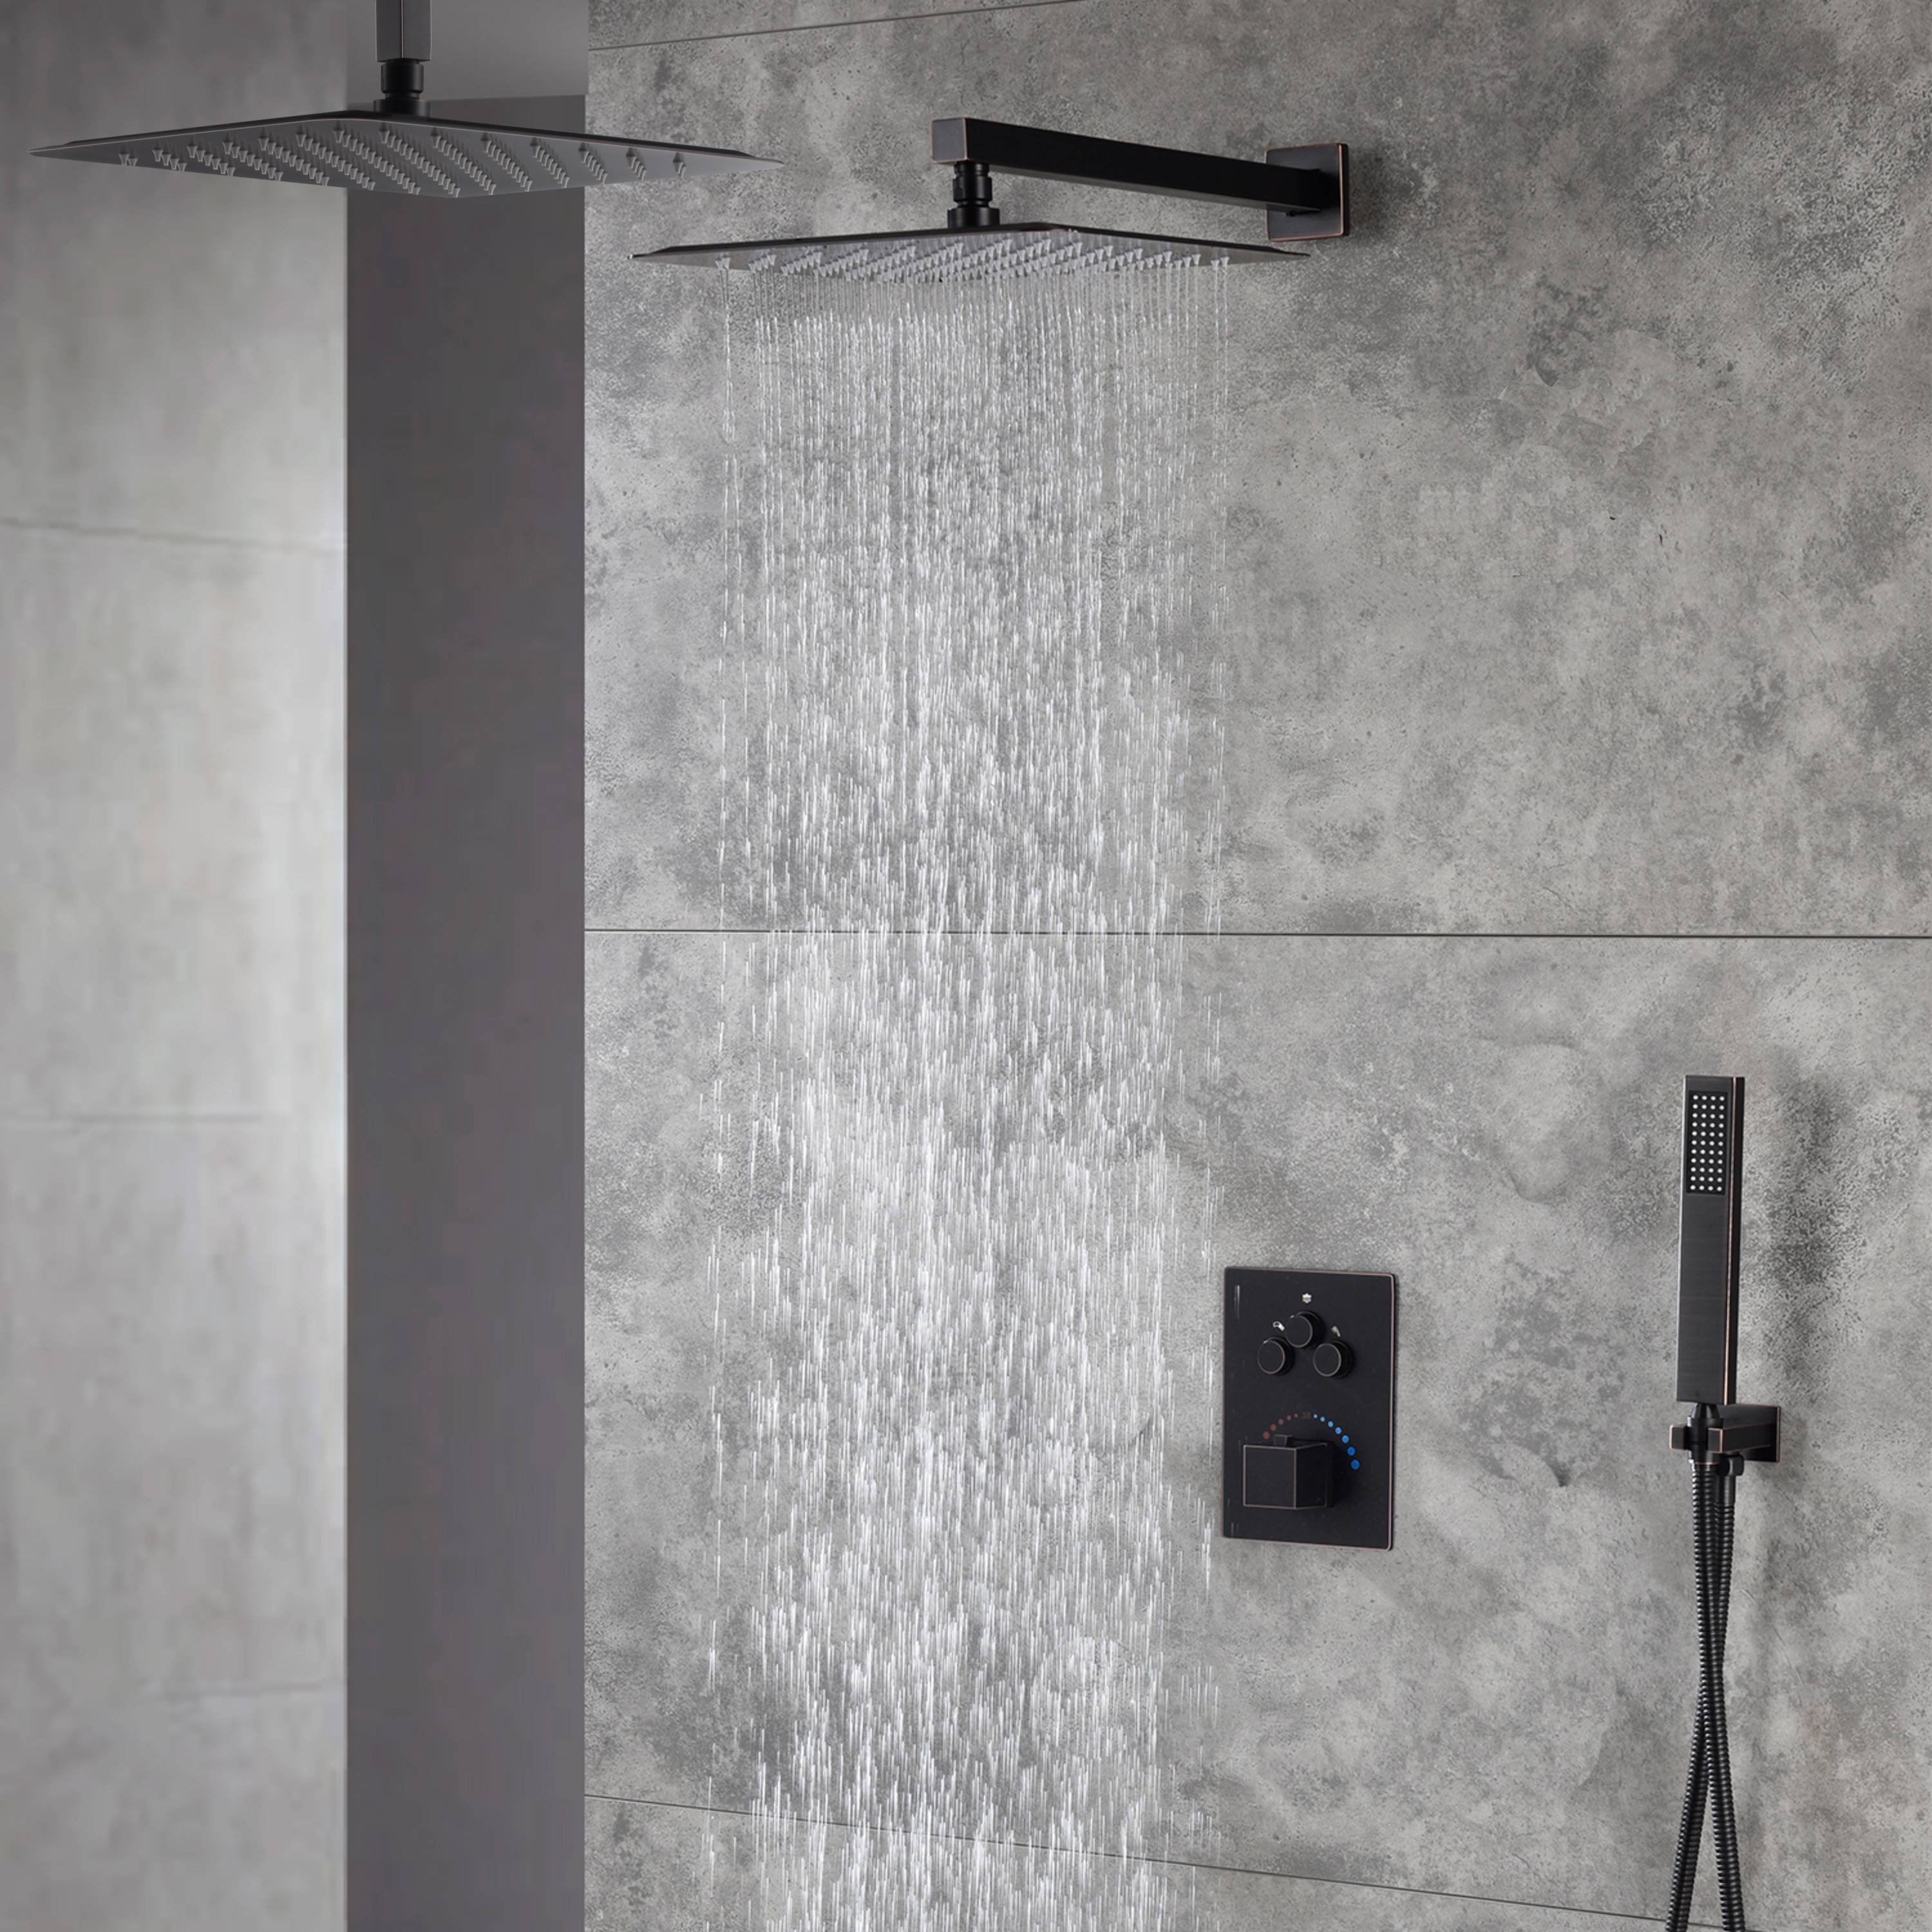 12-Inch Non-LED Light Ceiling Mounted Oil Rubbed Bronze 3-Way Thermostatic Shower Faucet System with Wall Mount 12-Inch Rainfall Shower Head